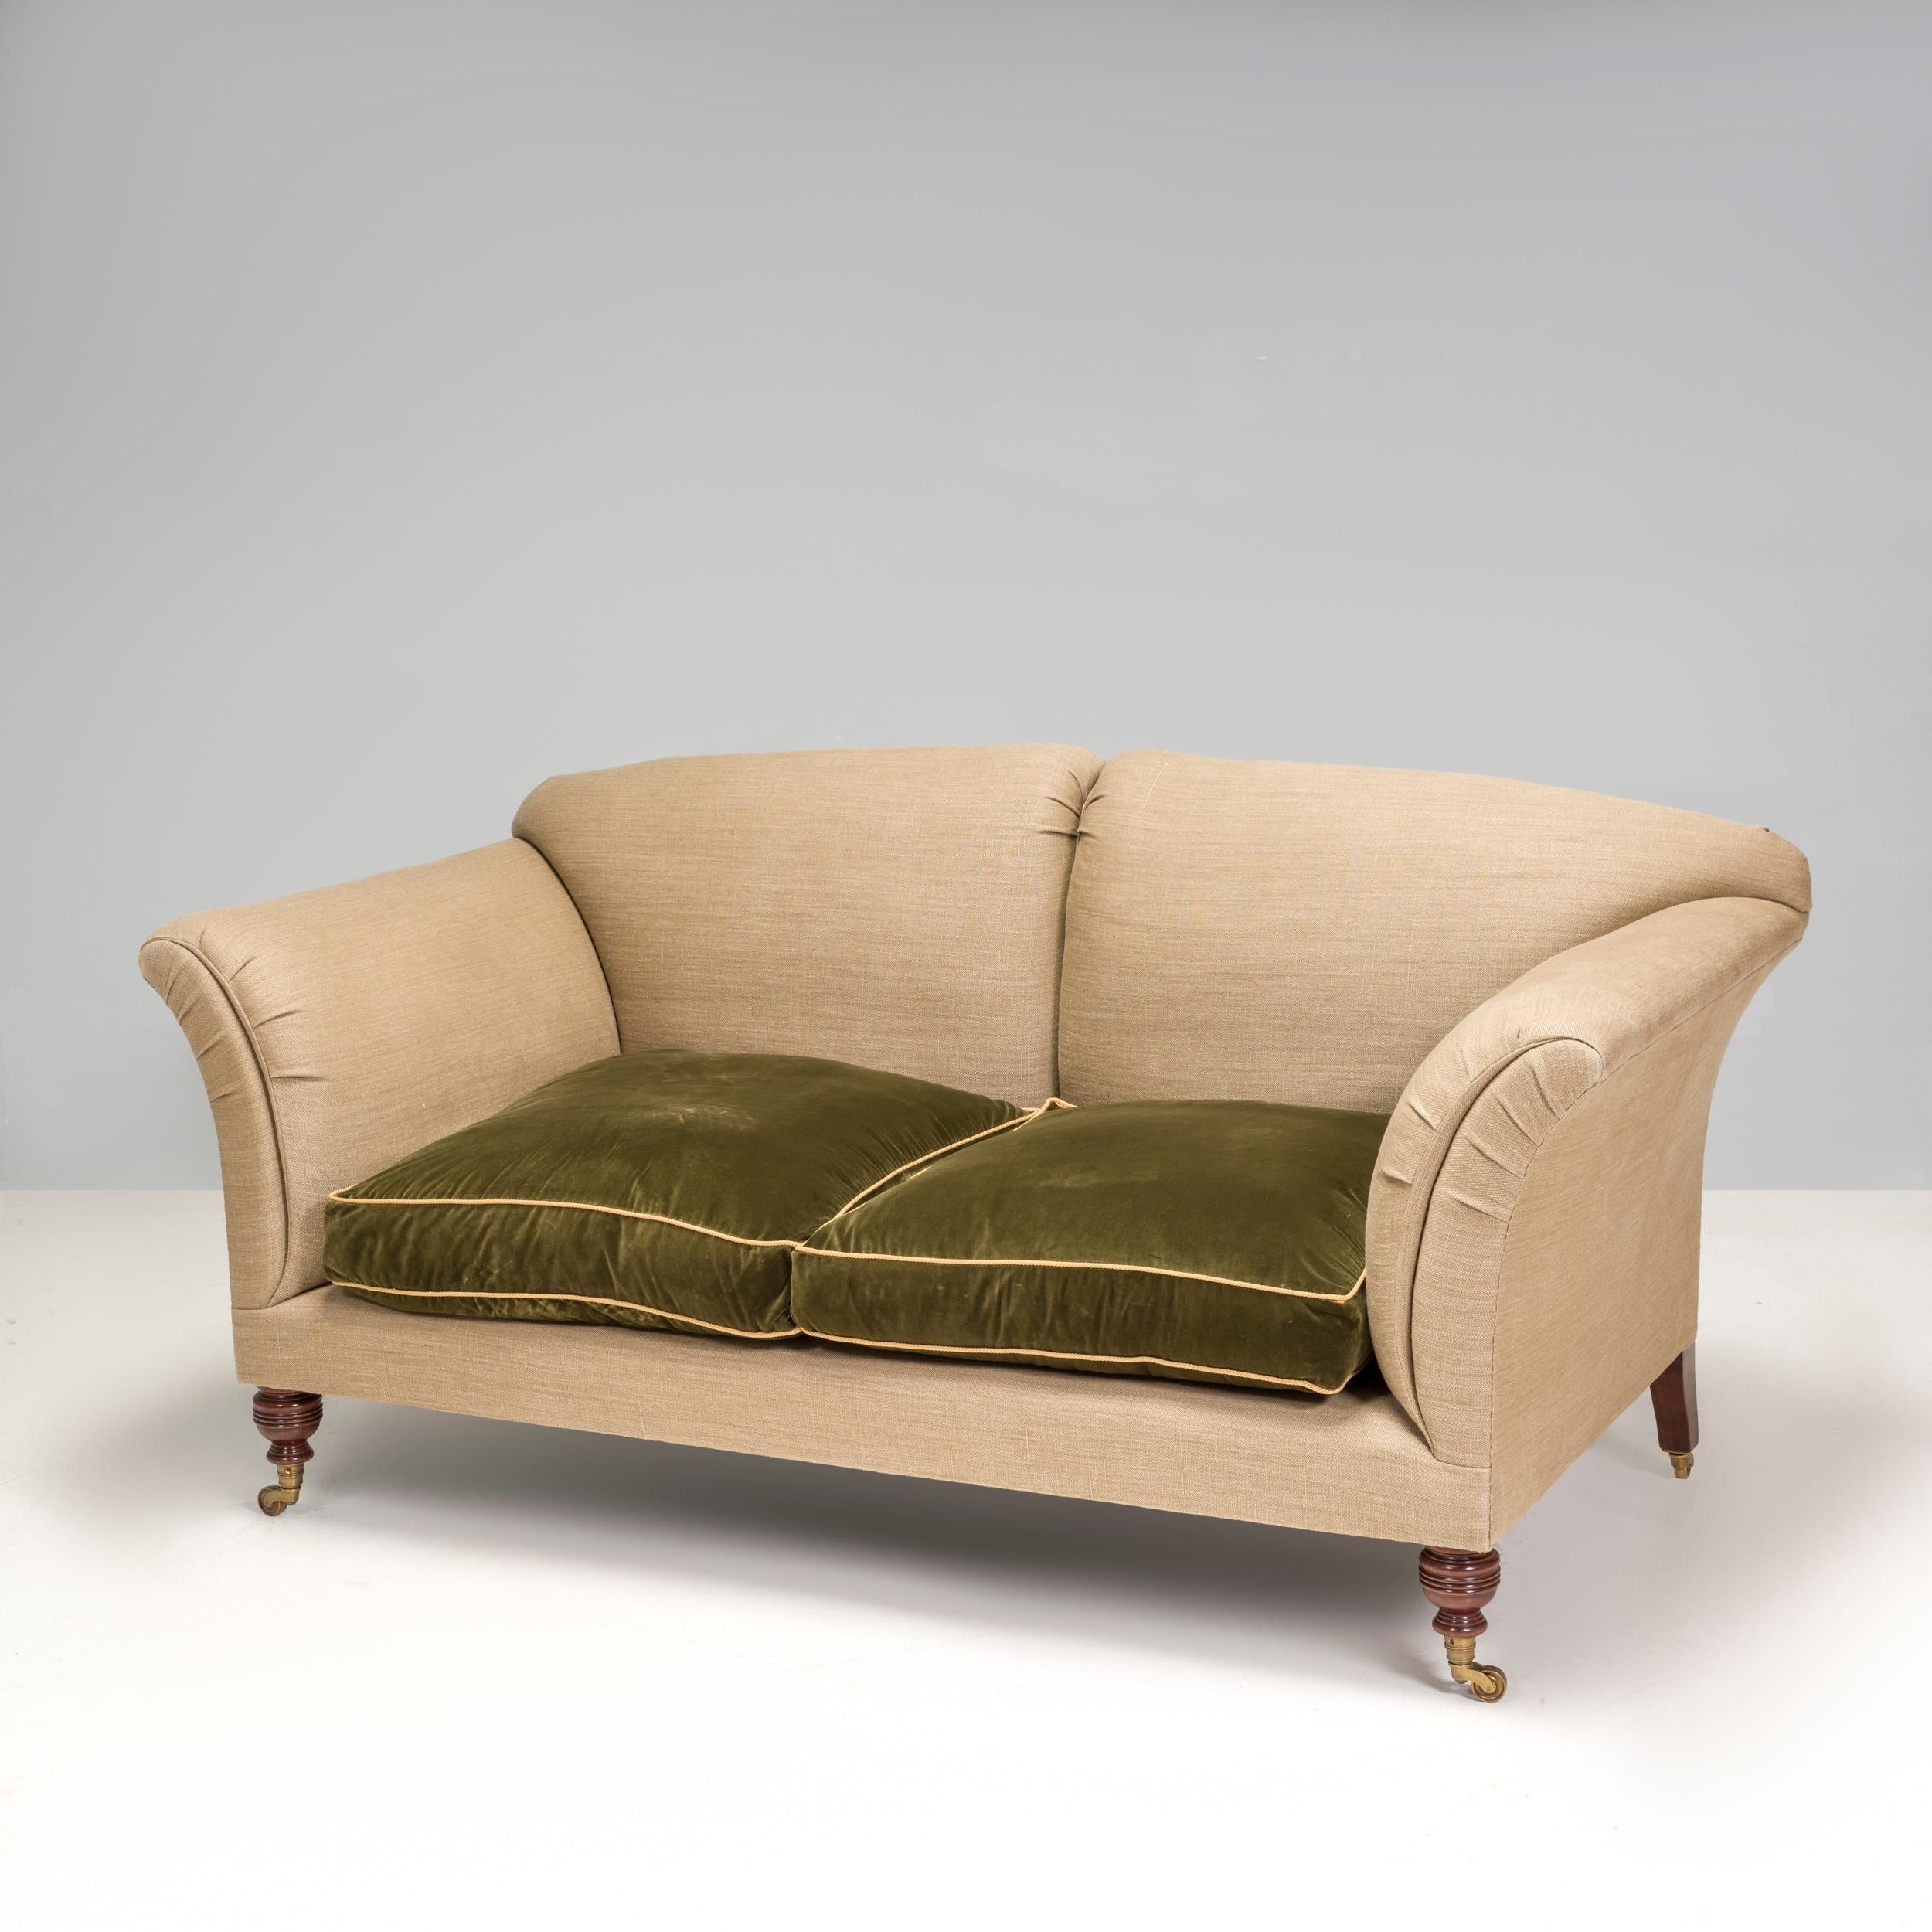 The Dean Sofa by Max Rollitt is a wonderful bespoke piece.  Making bespoke pieces since 1998, the collection now comprises beds, chairs, tables, lighting and more. These days, it’s Max’s own interiors projects that tend to inform new designs, but at